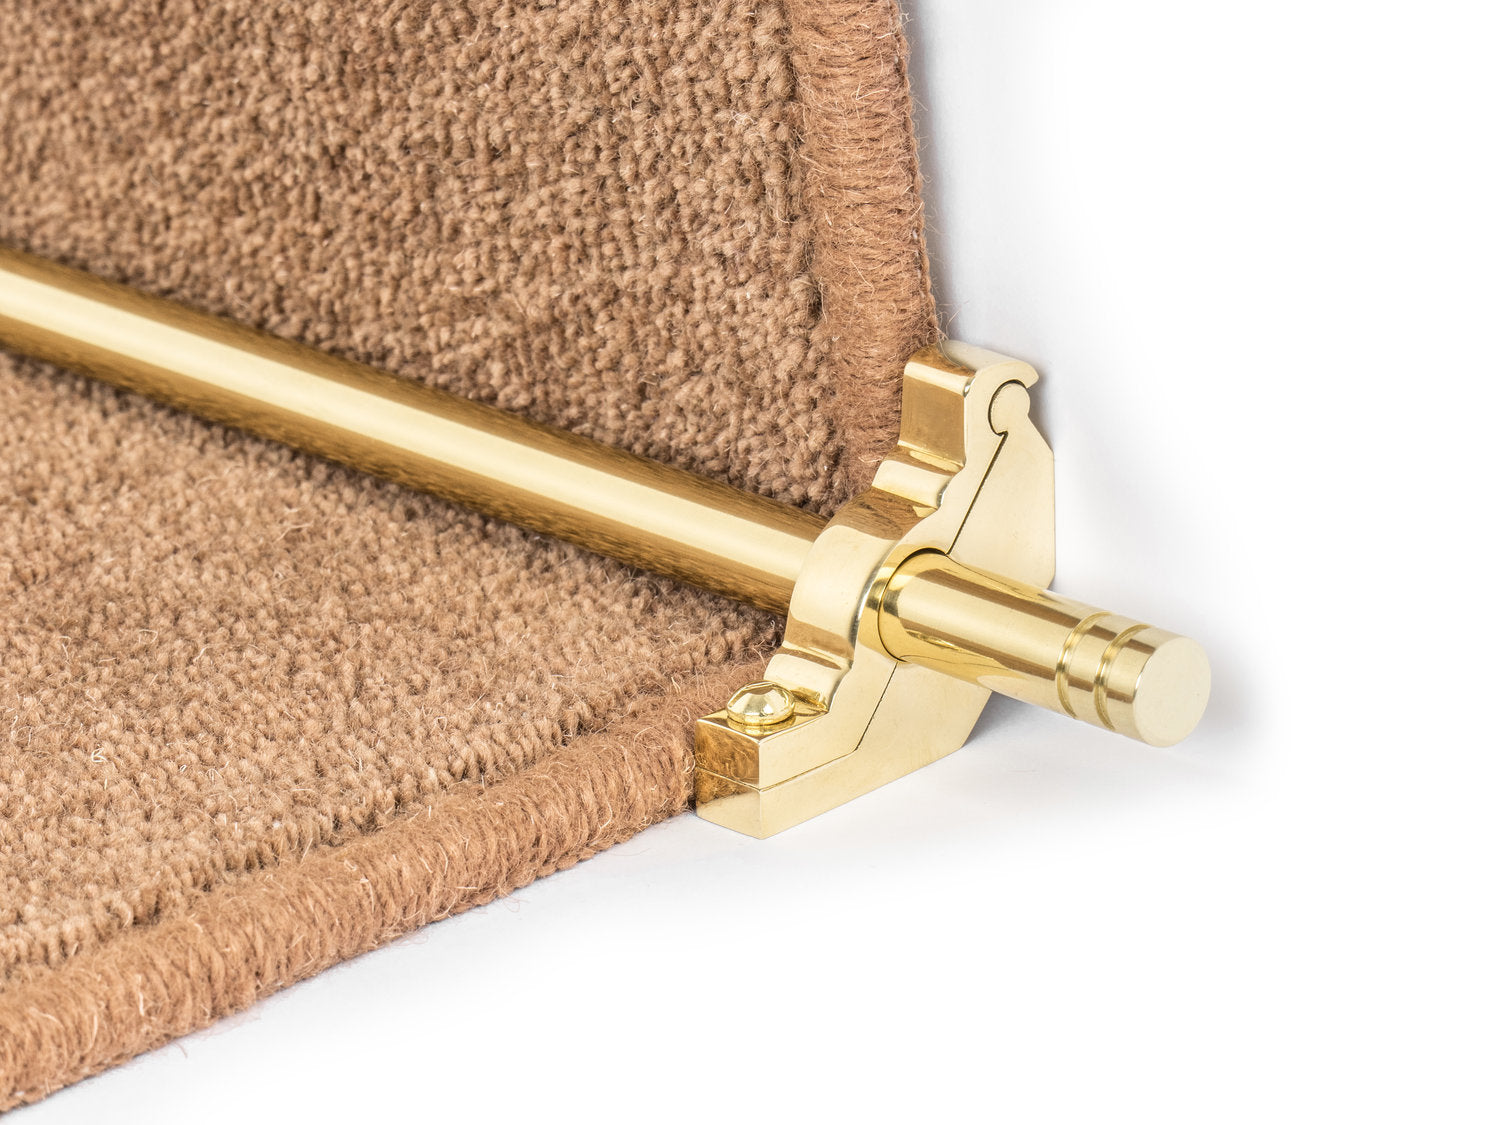 Premier Woburn stair rod solid core brass specialist finish